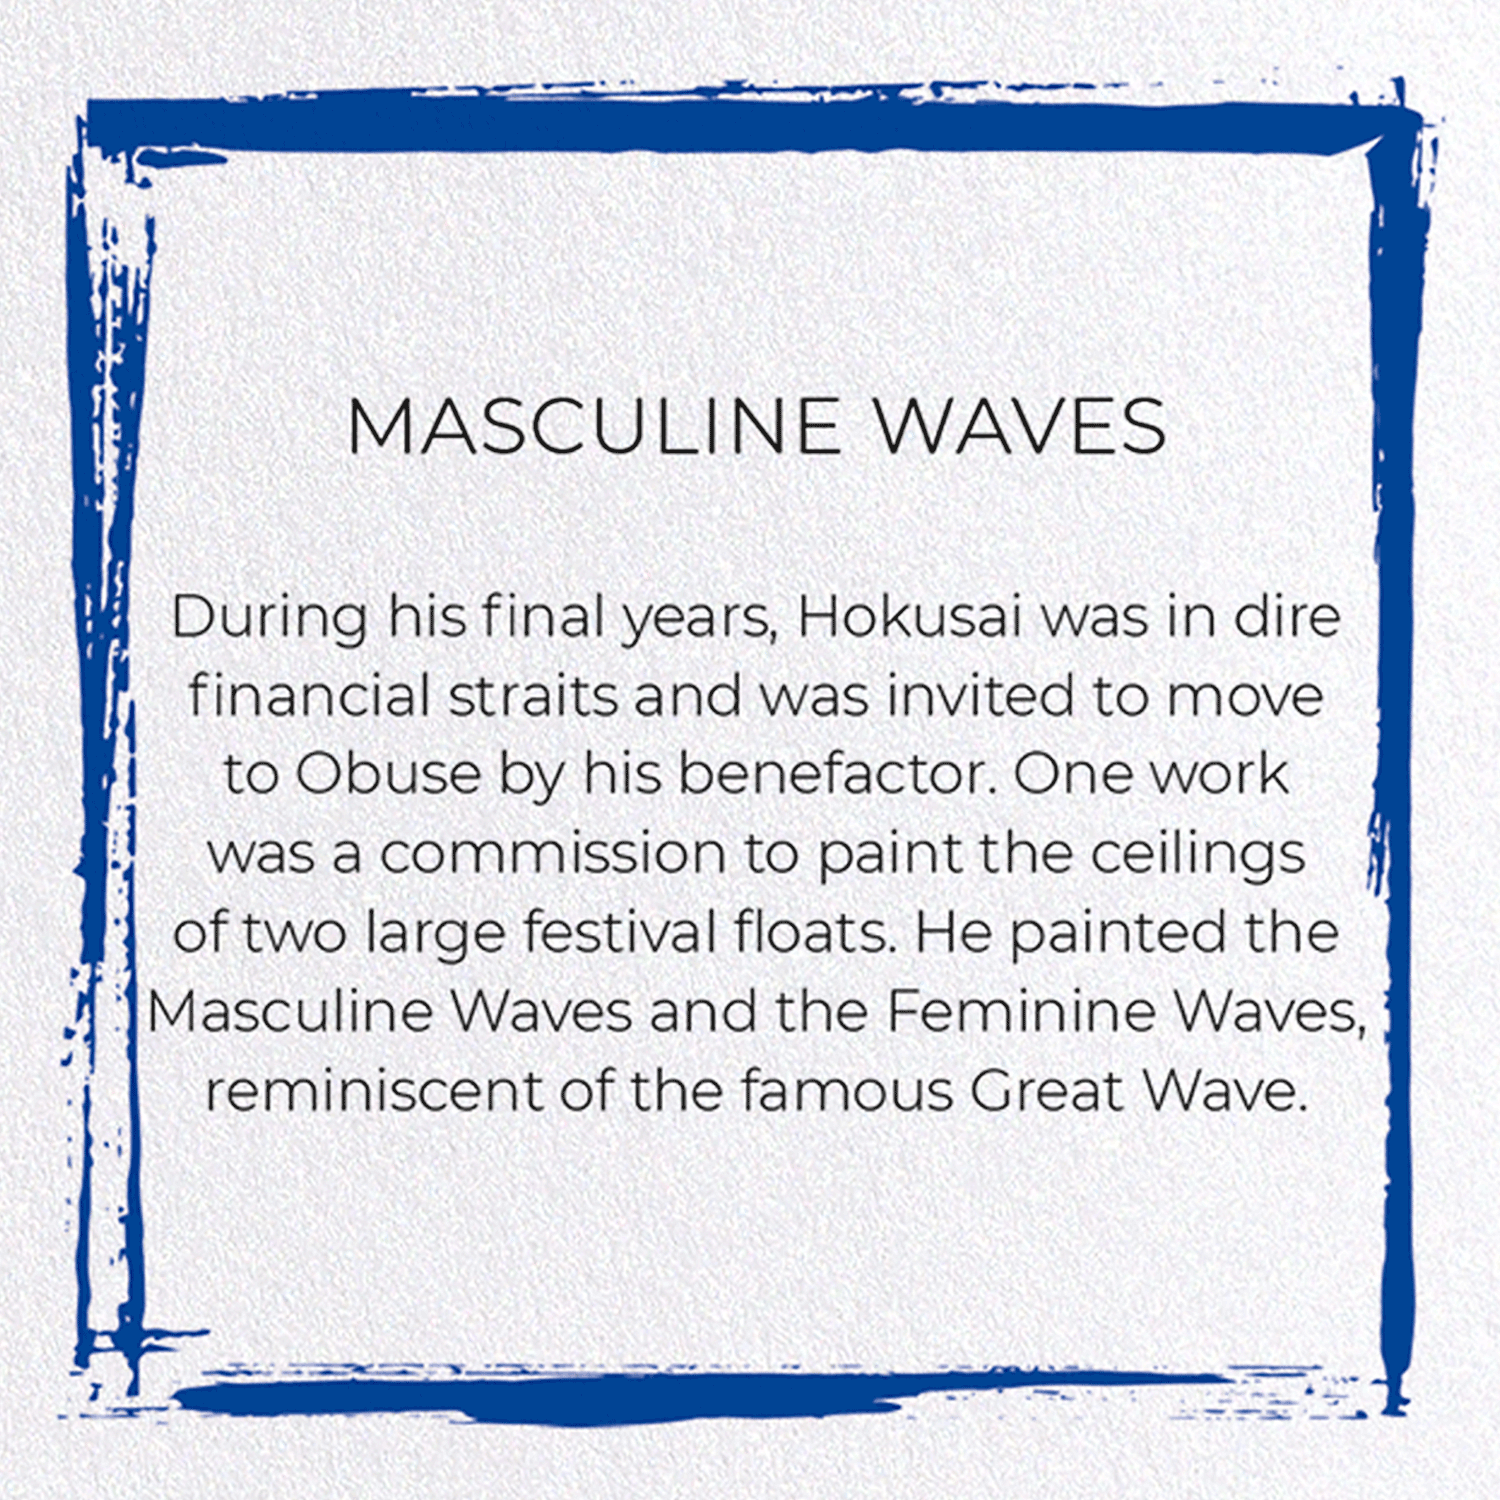 MASCULINE WAVES: Japanese Greeting Card